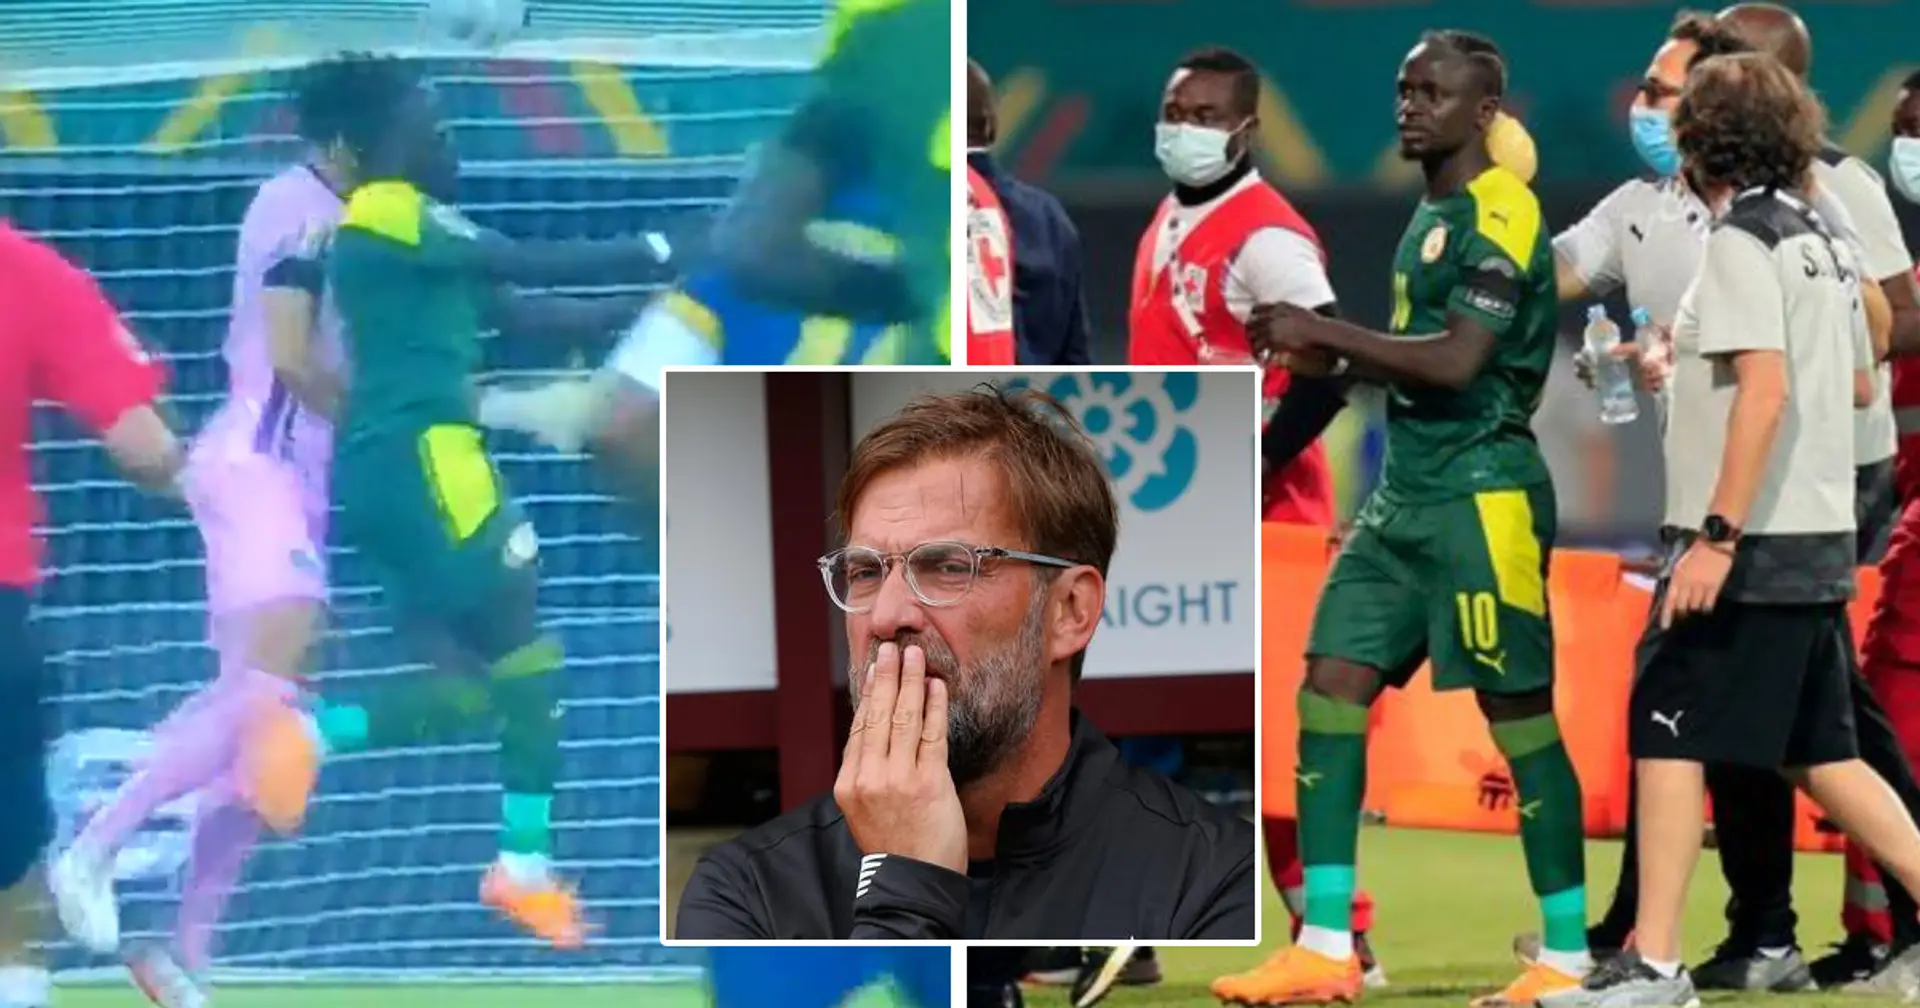 Mane suffers horrible blow in clash of heads during Senegal game, seems to lose consciousness